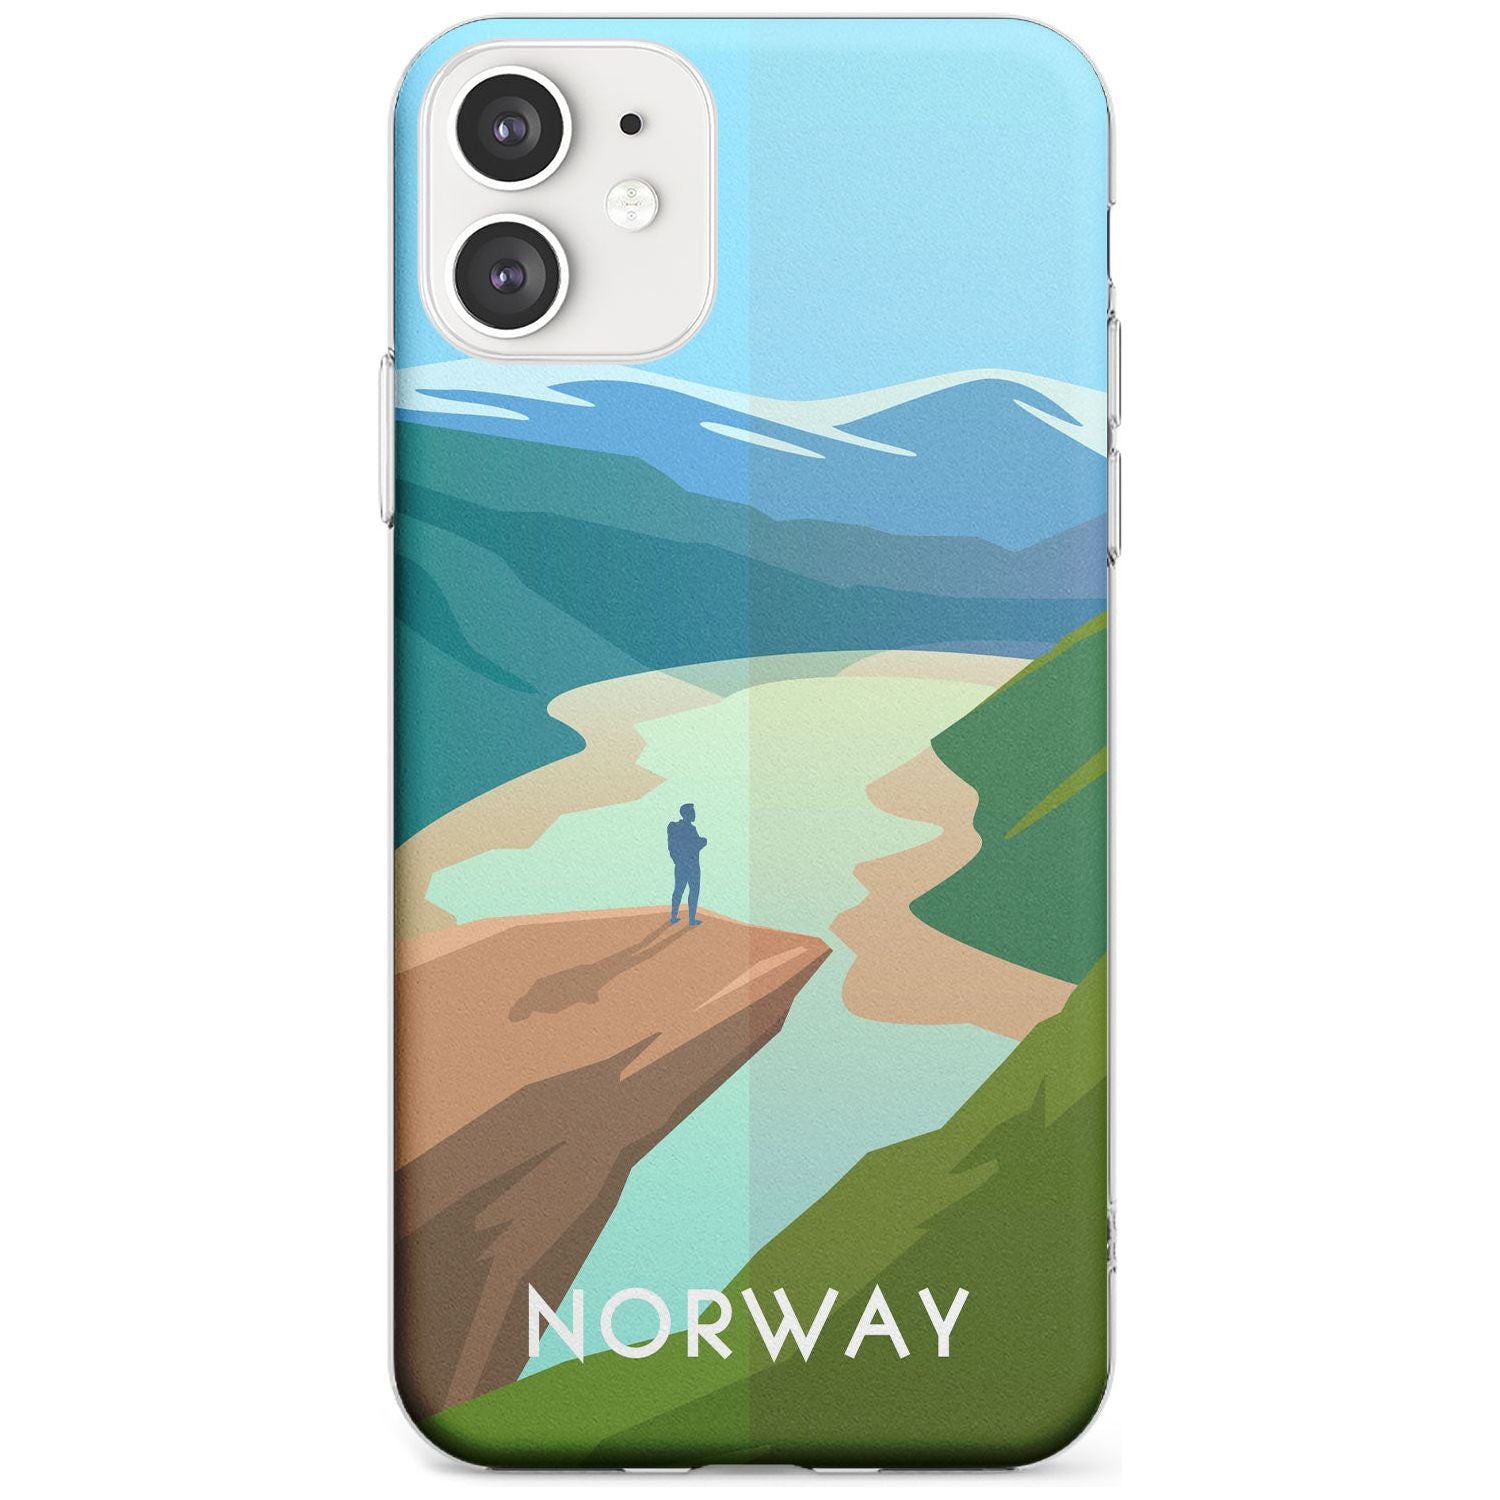 Vintage Travel Poster Norway Slim TPU Phone Case for iPhone 11